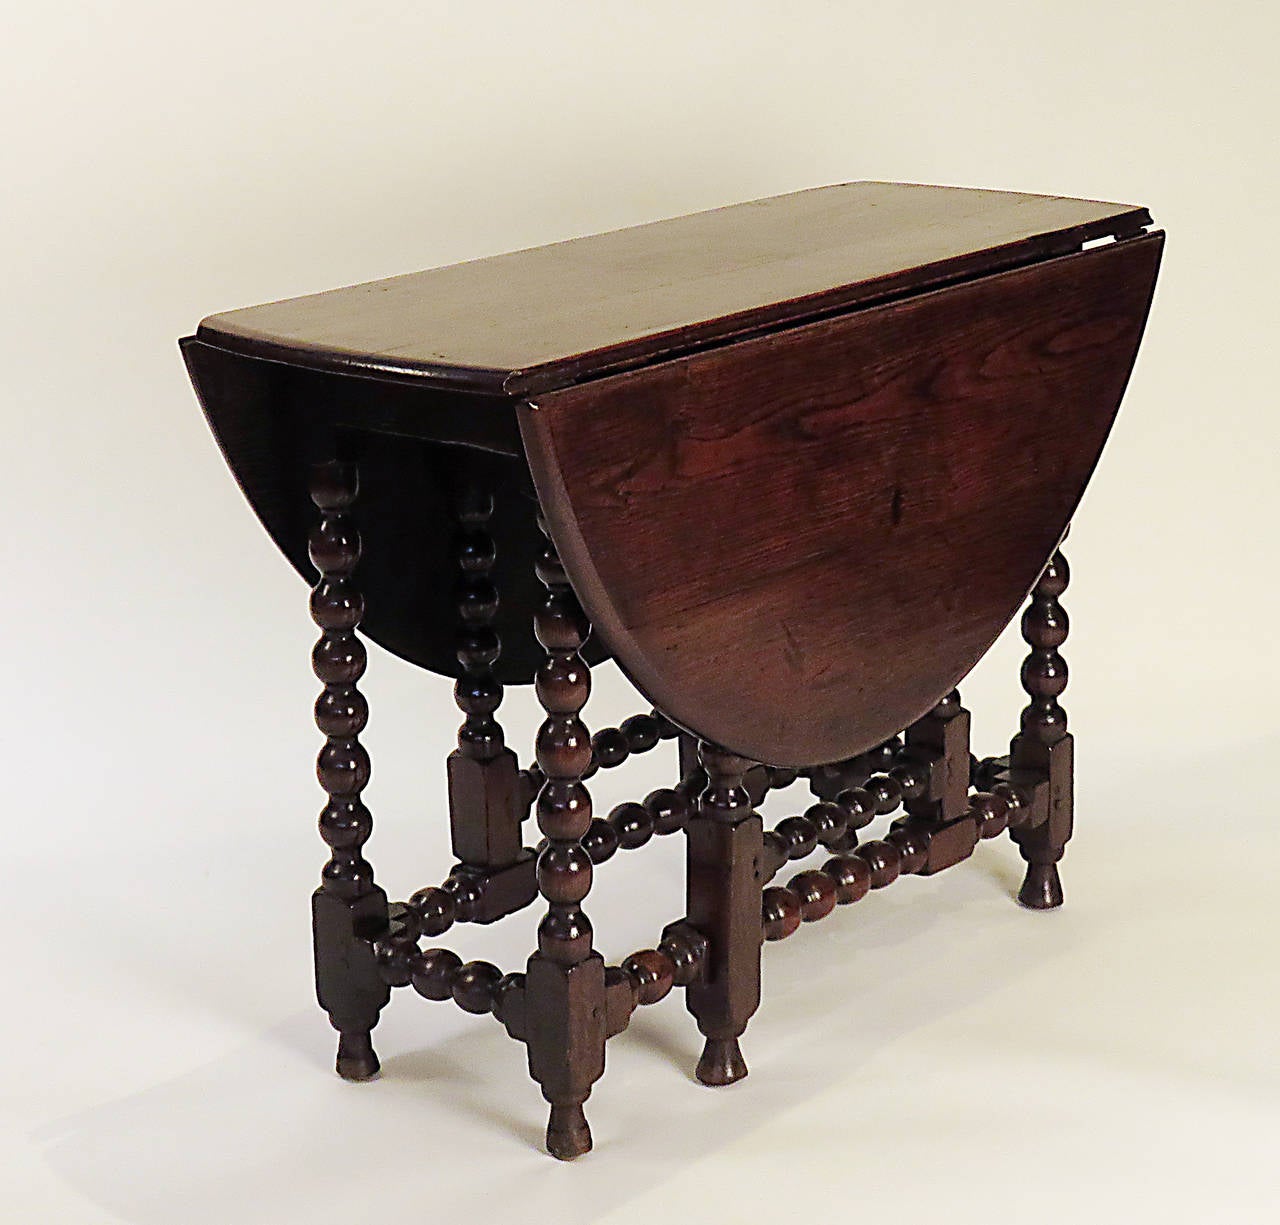 A very nice early English oak drop-leaf table made during the reign of Charles II, circa 1680. Very nice color, patina and turnings. Recently professionally tightened and polished so it is ready to go. This sort of table looks great in a